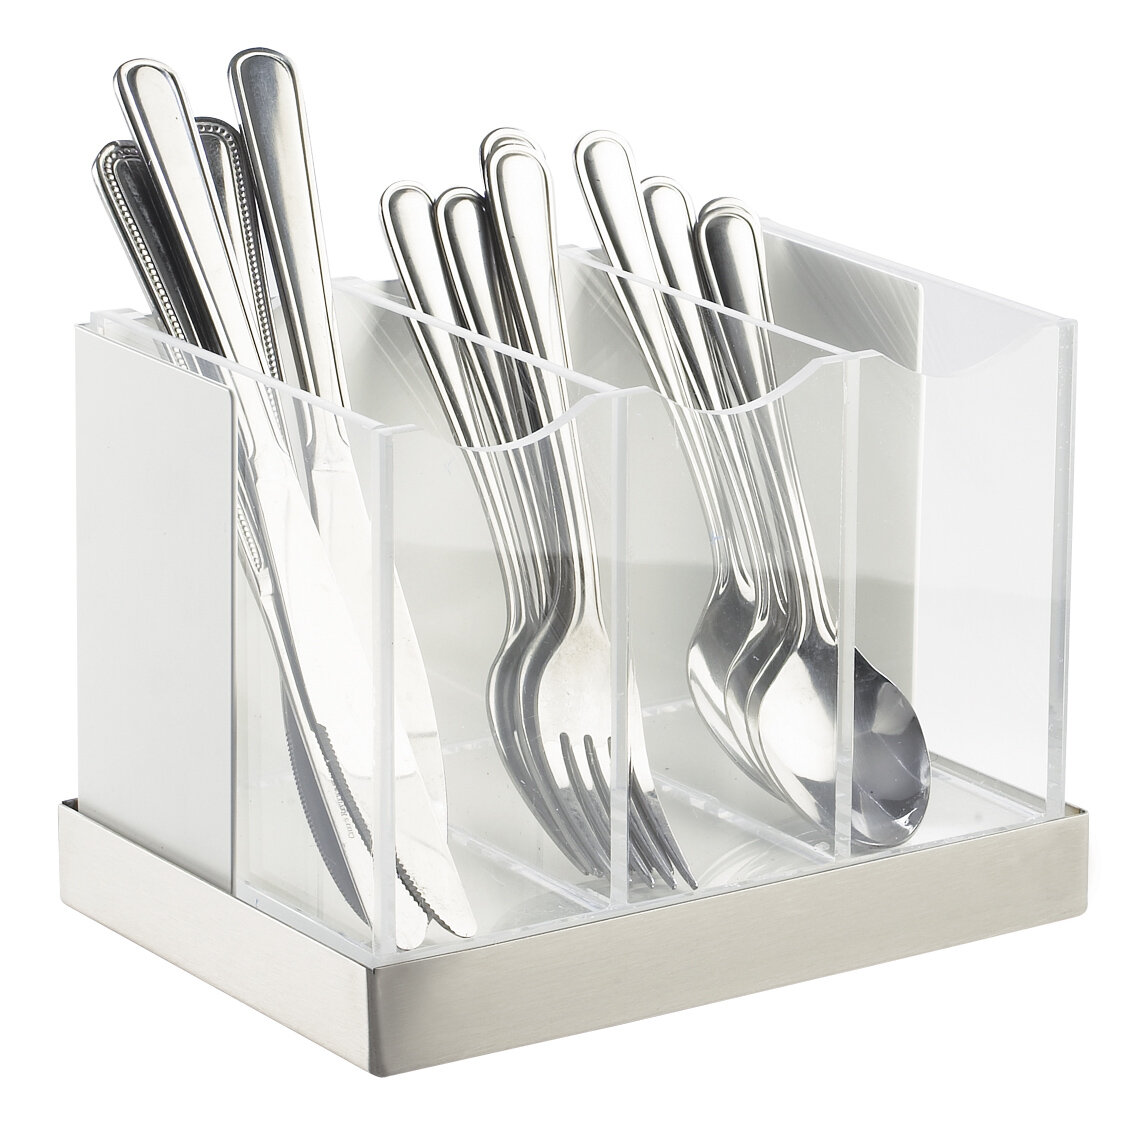 Galleon 2 In 1 Ladle Rest With Flatware Holder Stainless Steel Utensils Caddy 